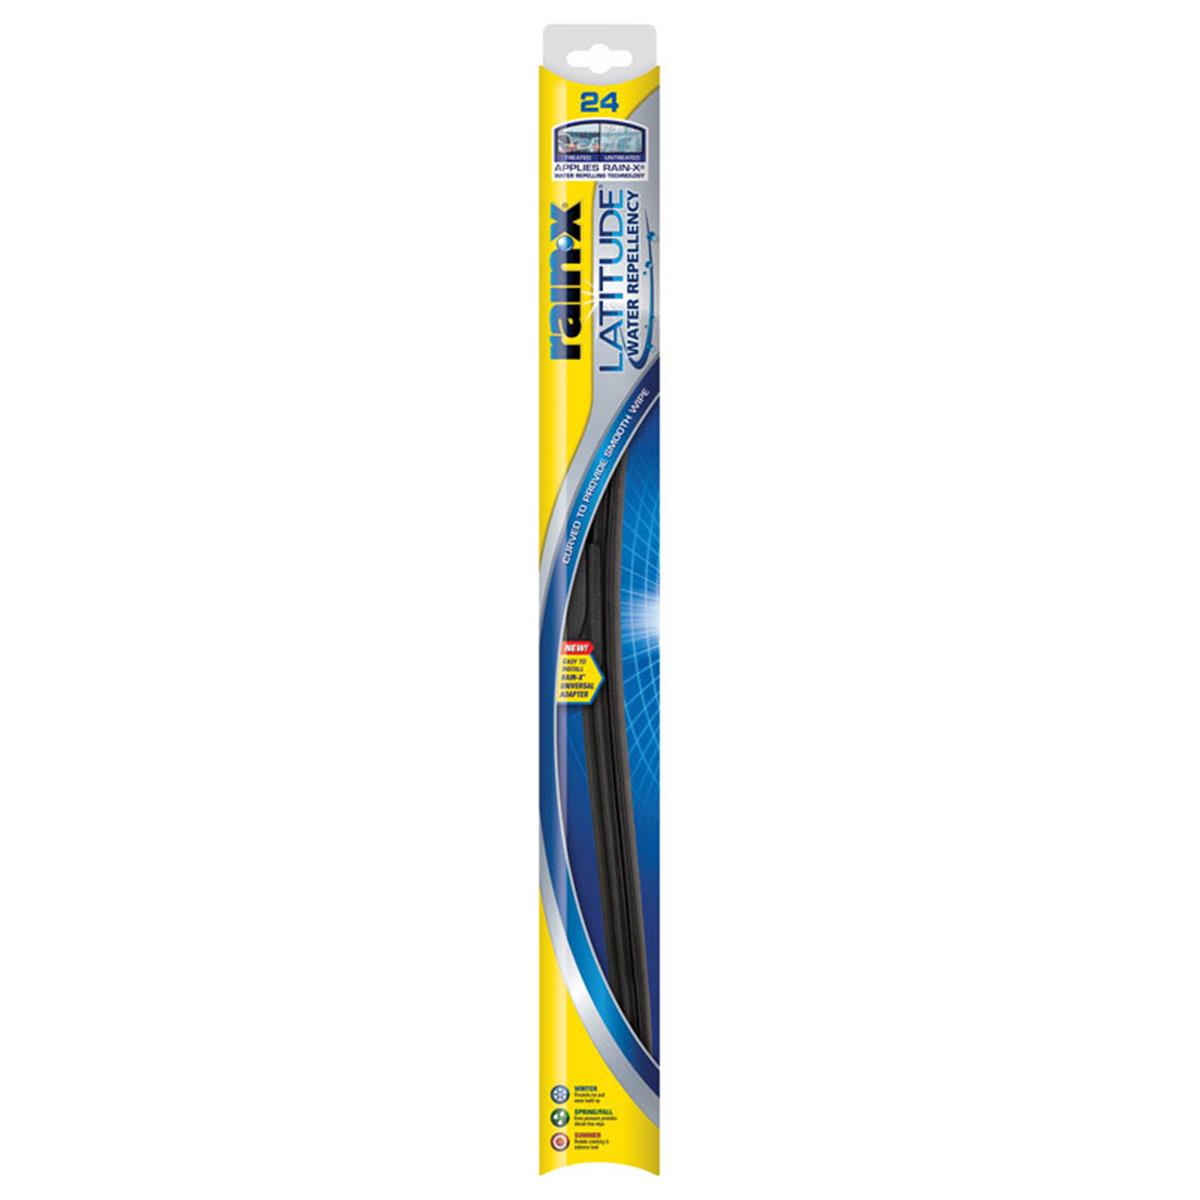 Picture of Itw Global Brands 5079280-2 24 in. Rain-X Latitude Wiper Blade